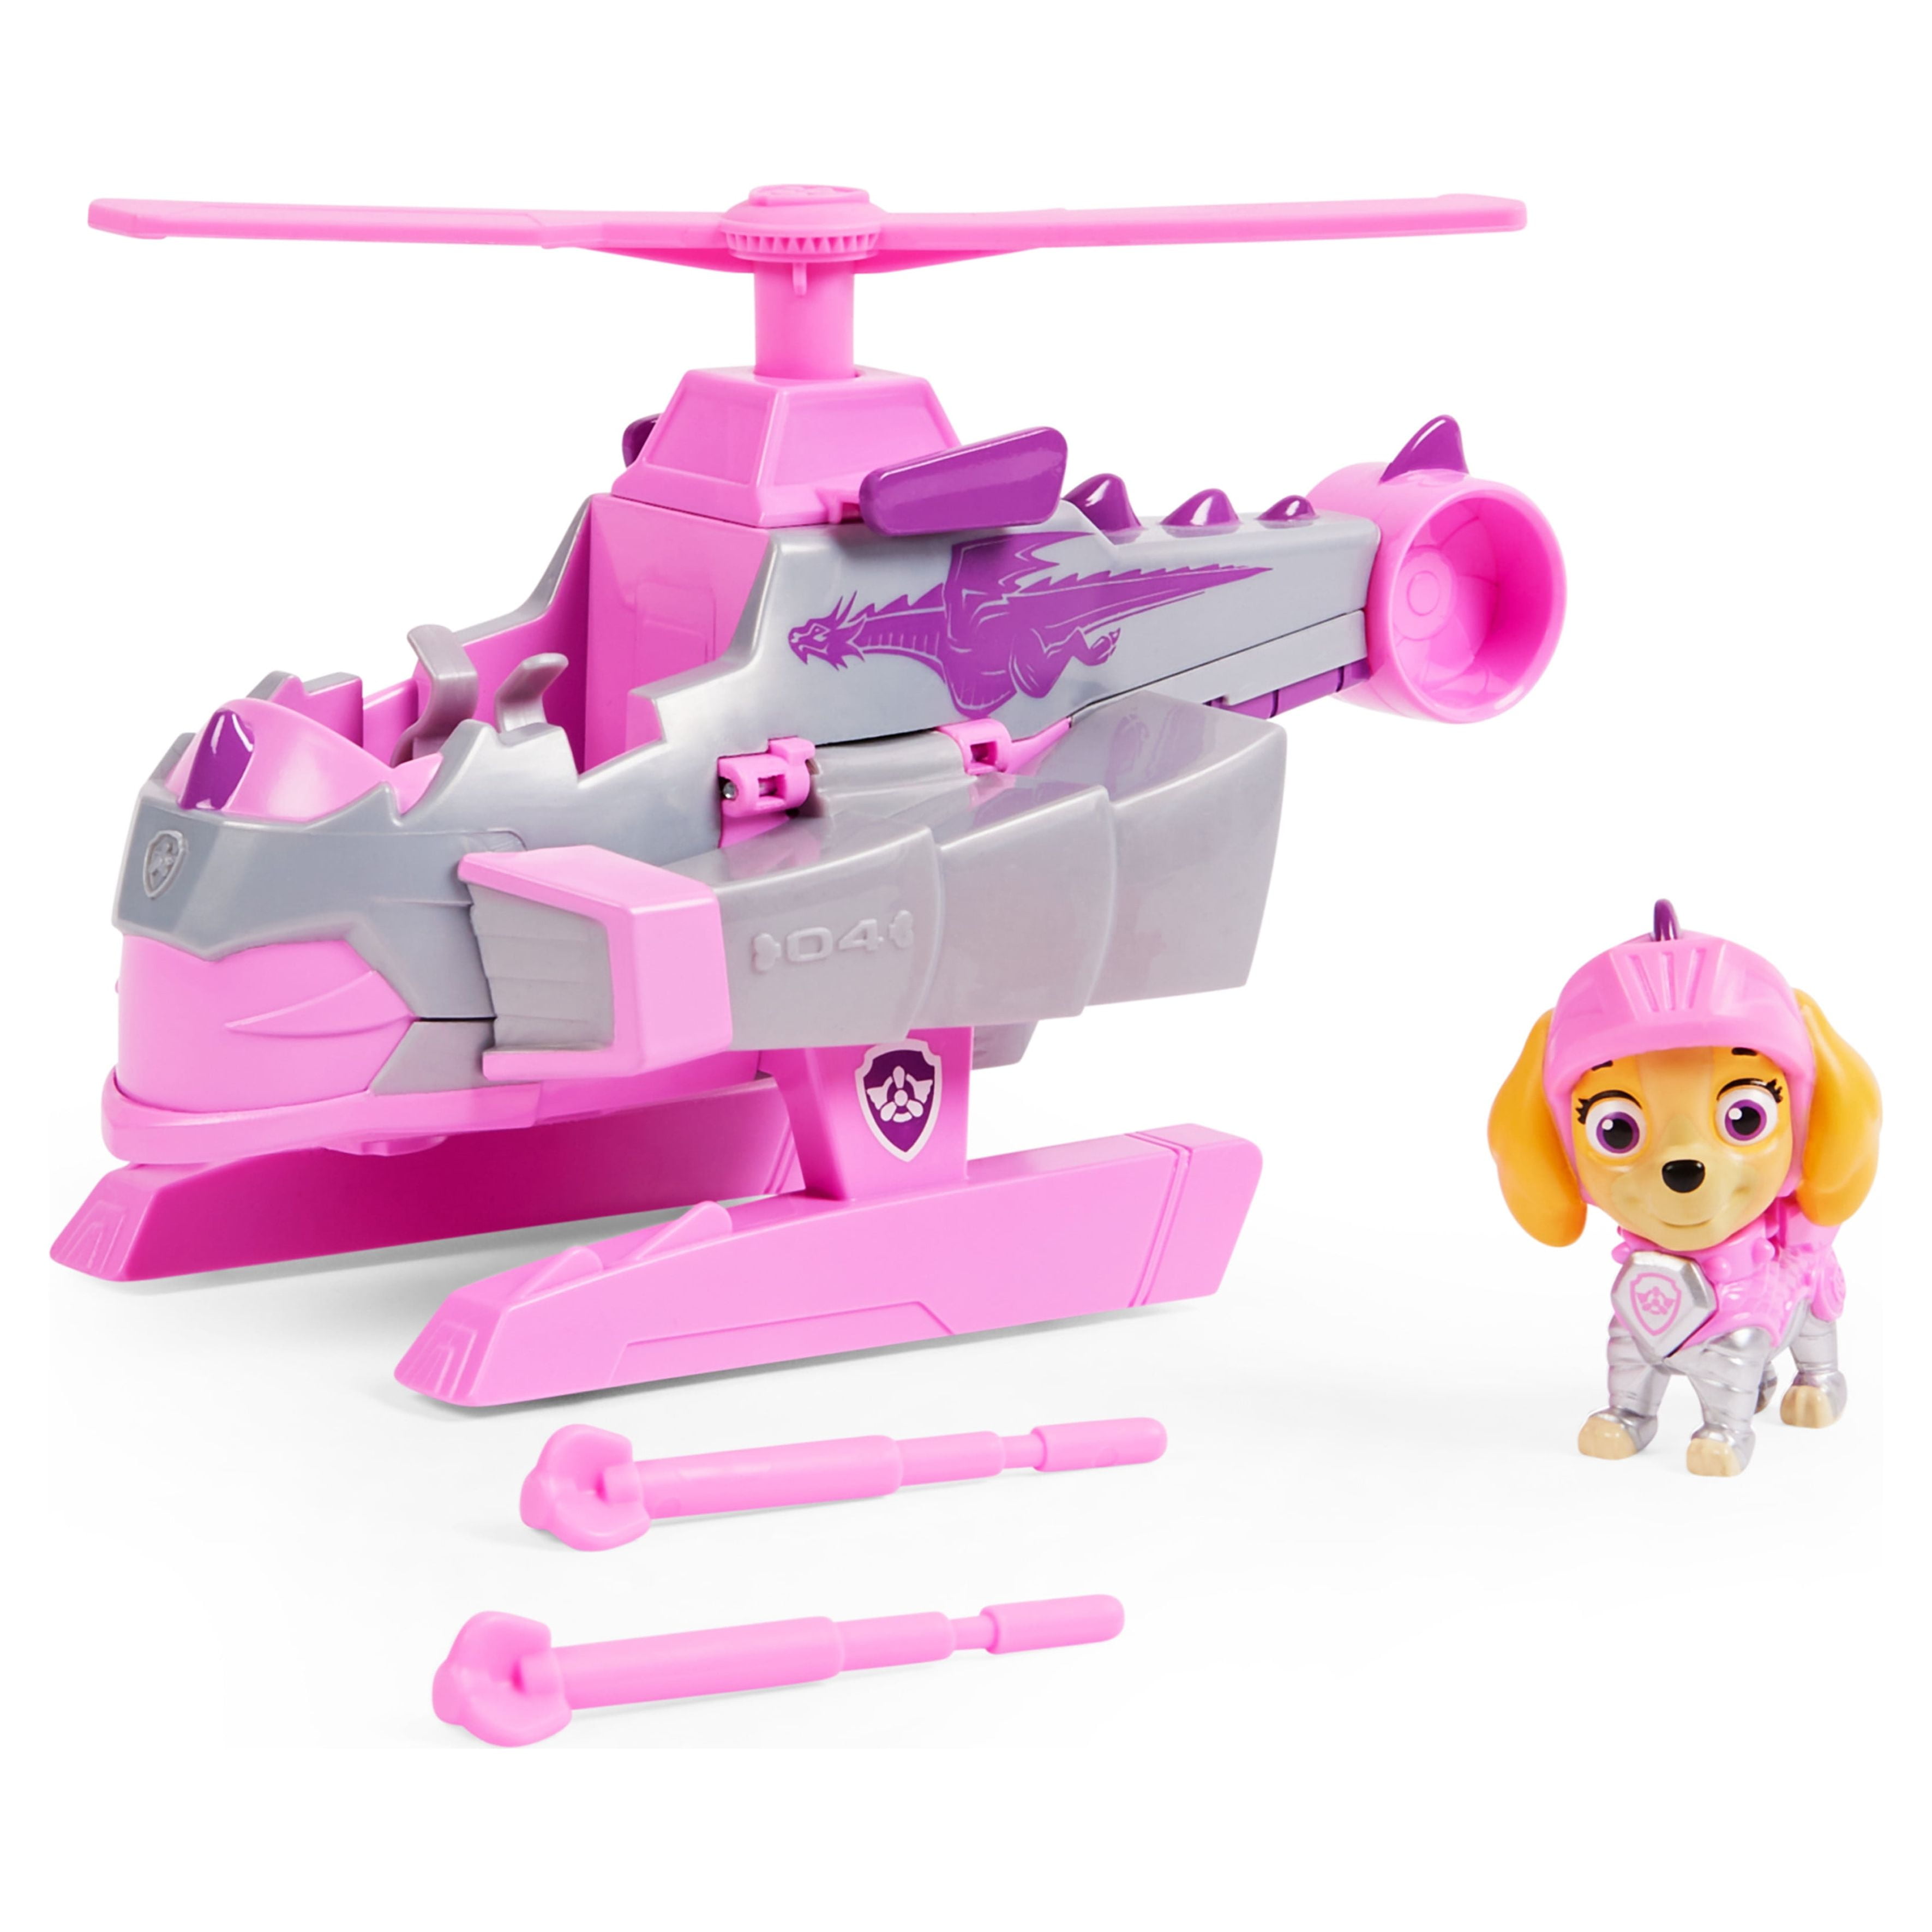 PAW Patrol: Rescue Knights - Transforming Car with Skye Action Figure $7.15  + Free S&H w/ Walmart+ or $35+